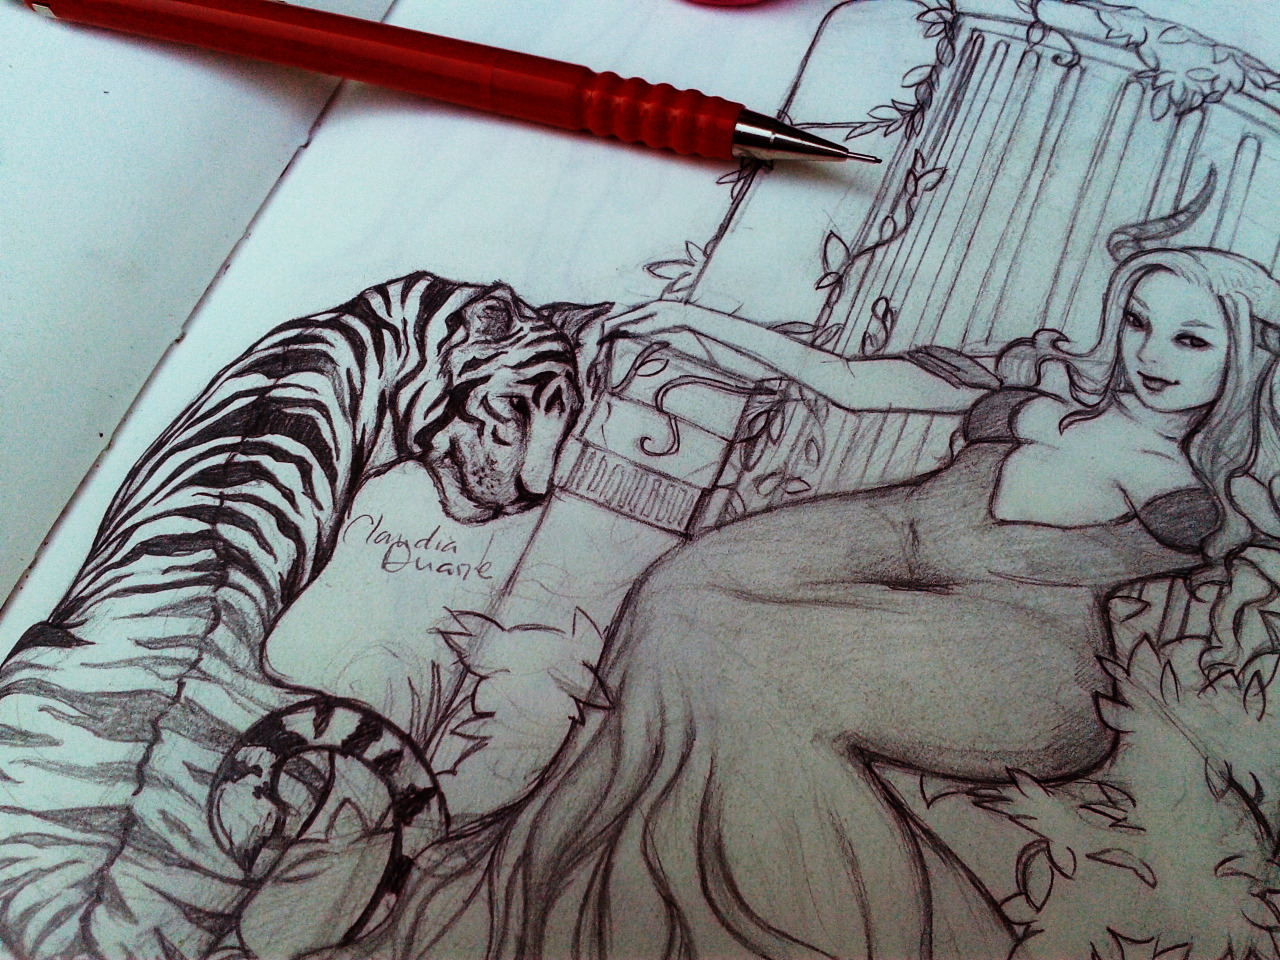 a part of one of my most recent drawings, i like this one very much, especially the tiger!